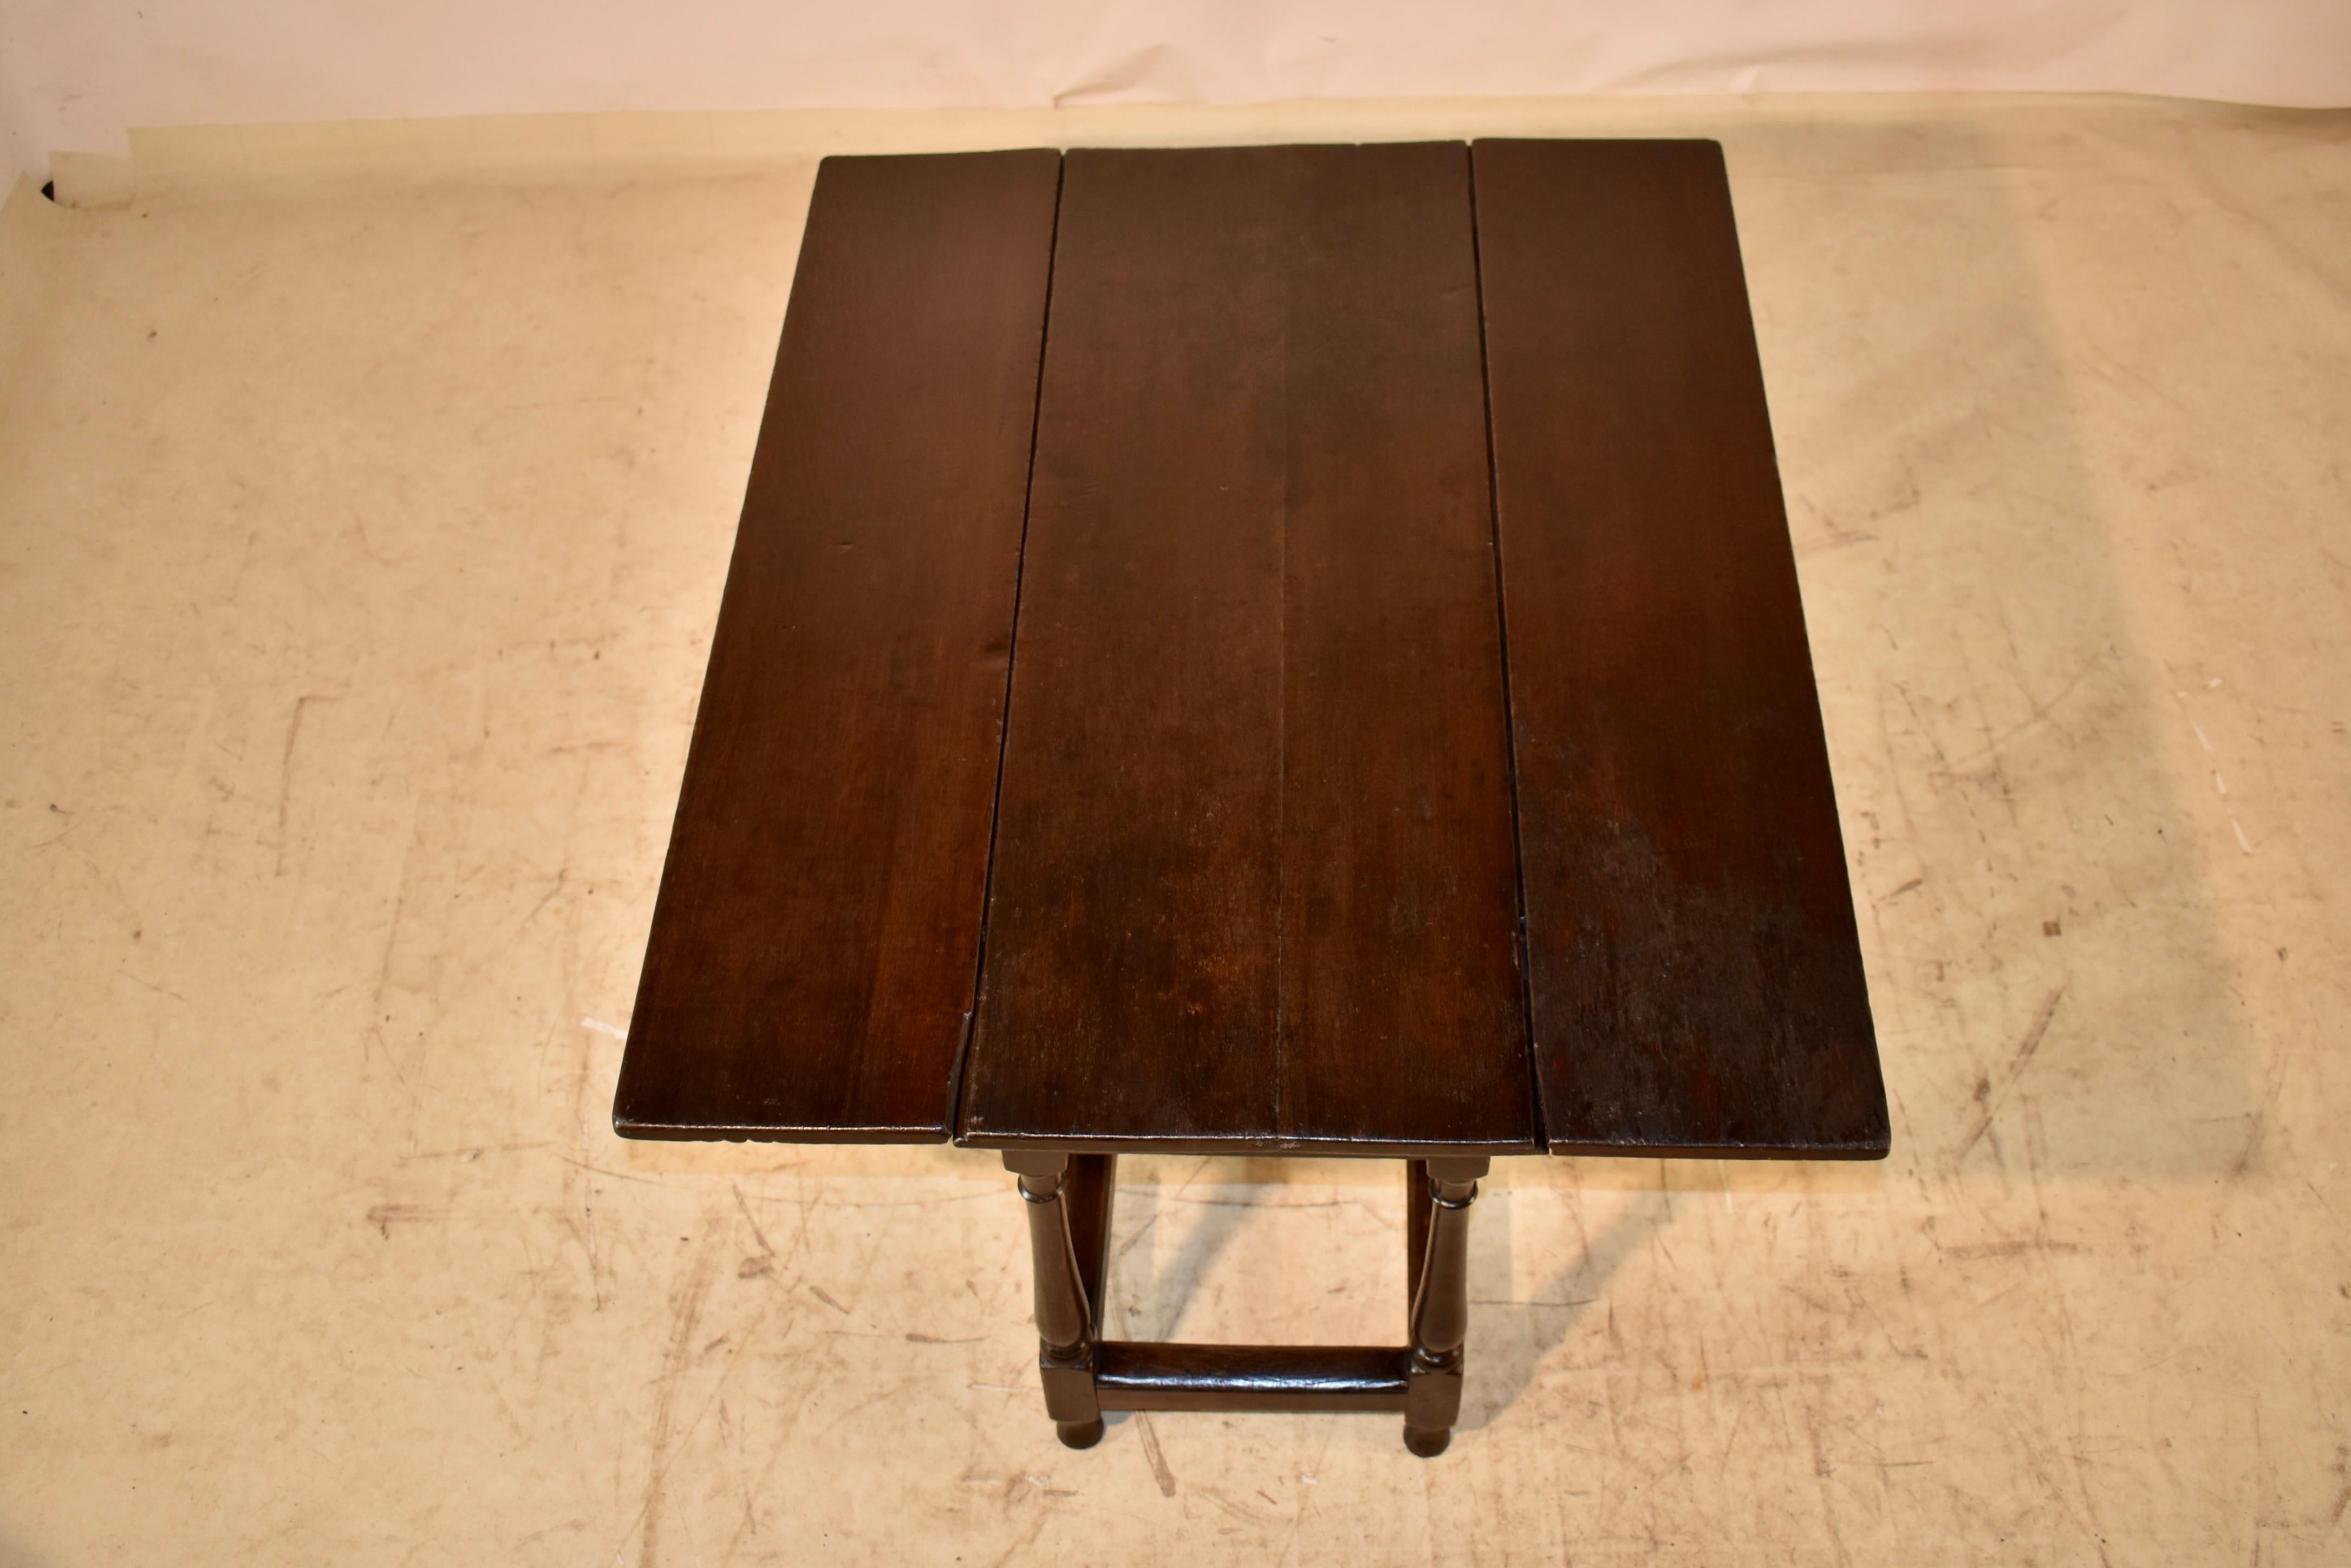 Late 17th - Early 18th Century Drop Leaf Table from England For Sale 5